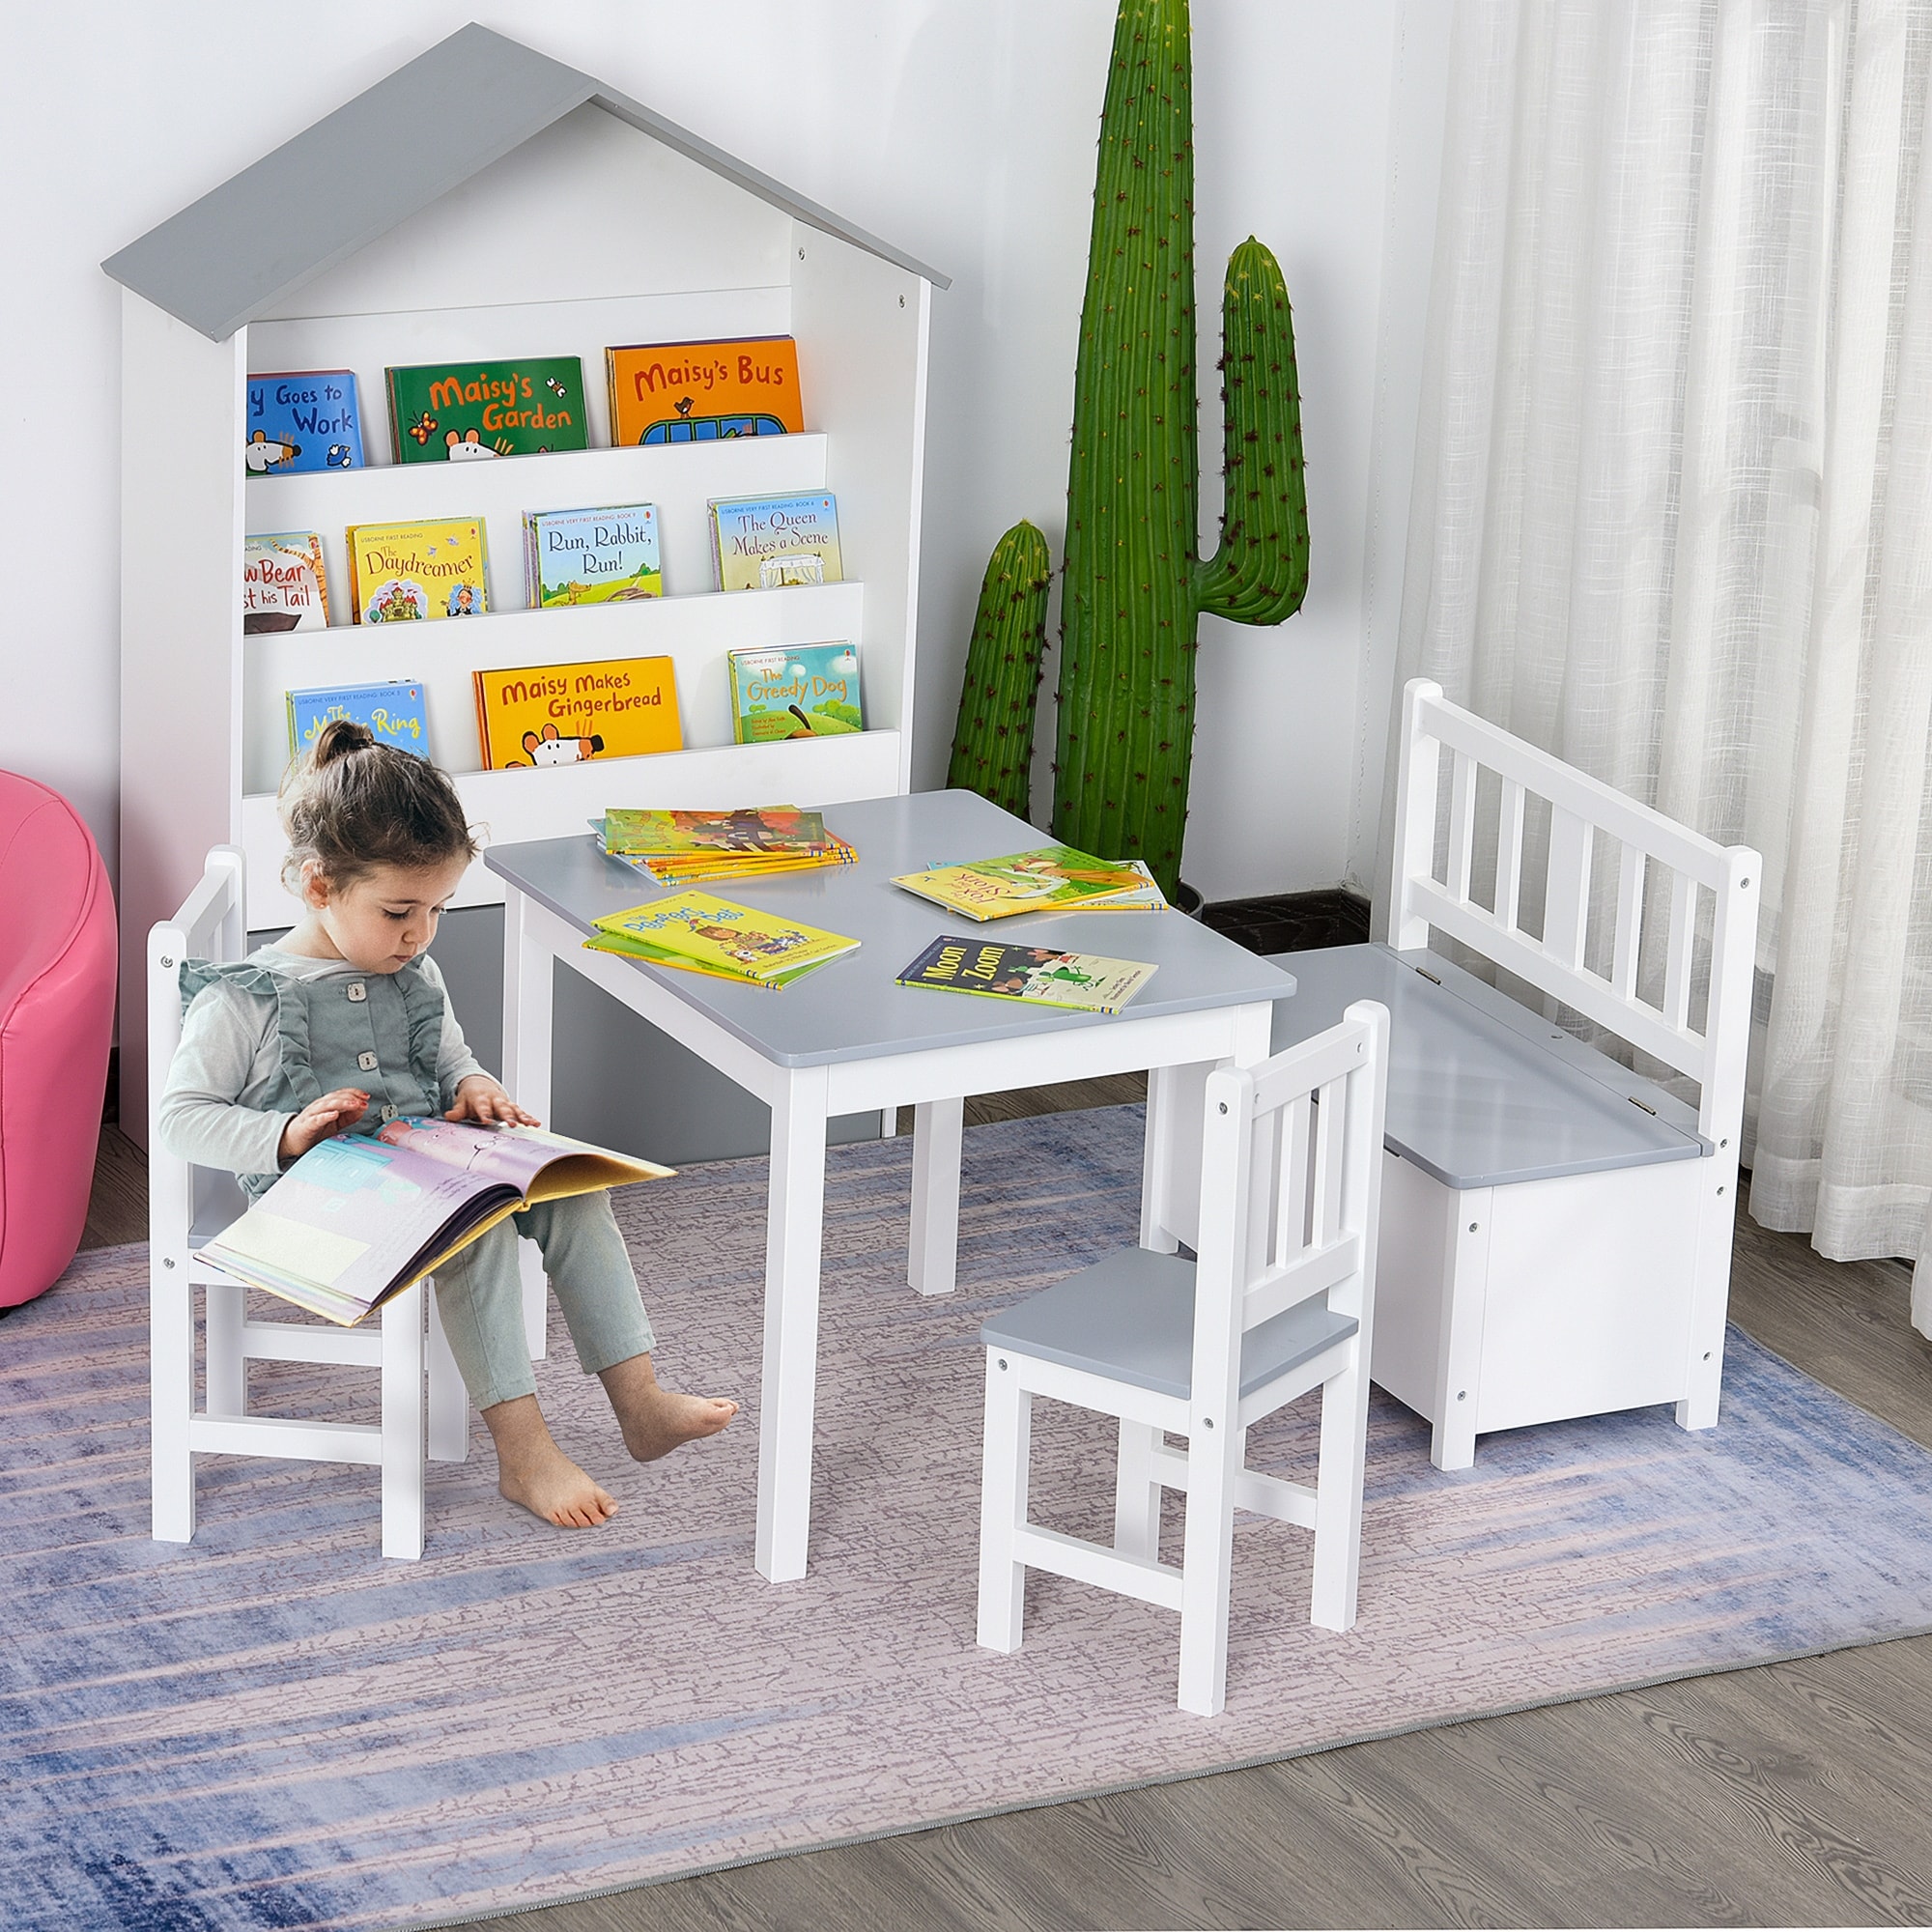 https://ak1.ostkcdn.com/images/products/is/images/direct/96be46dfc223d9dbd0a721a612f20cb7661ac6de/Qaba-4-Piece-Set-Kids-Wood-Table-Chair-Bench-with-Storage-Function-Toddlers-Age-3-Years-up%2C-Grey-and-White.jpg